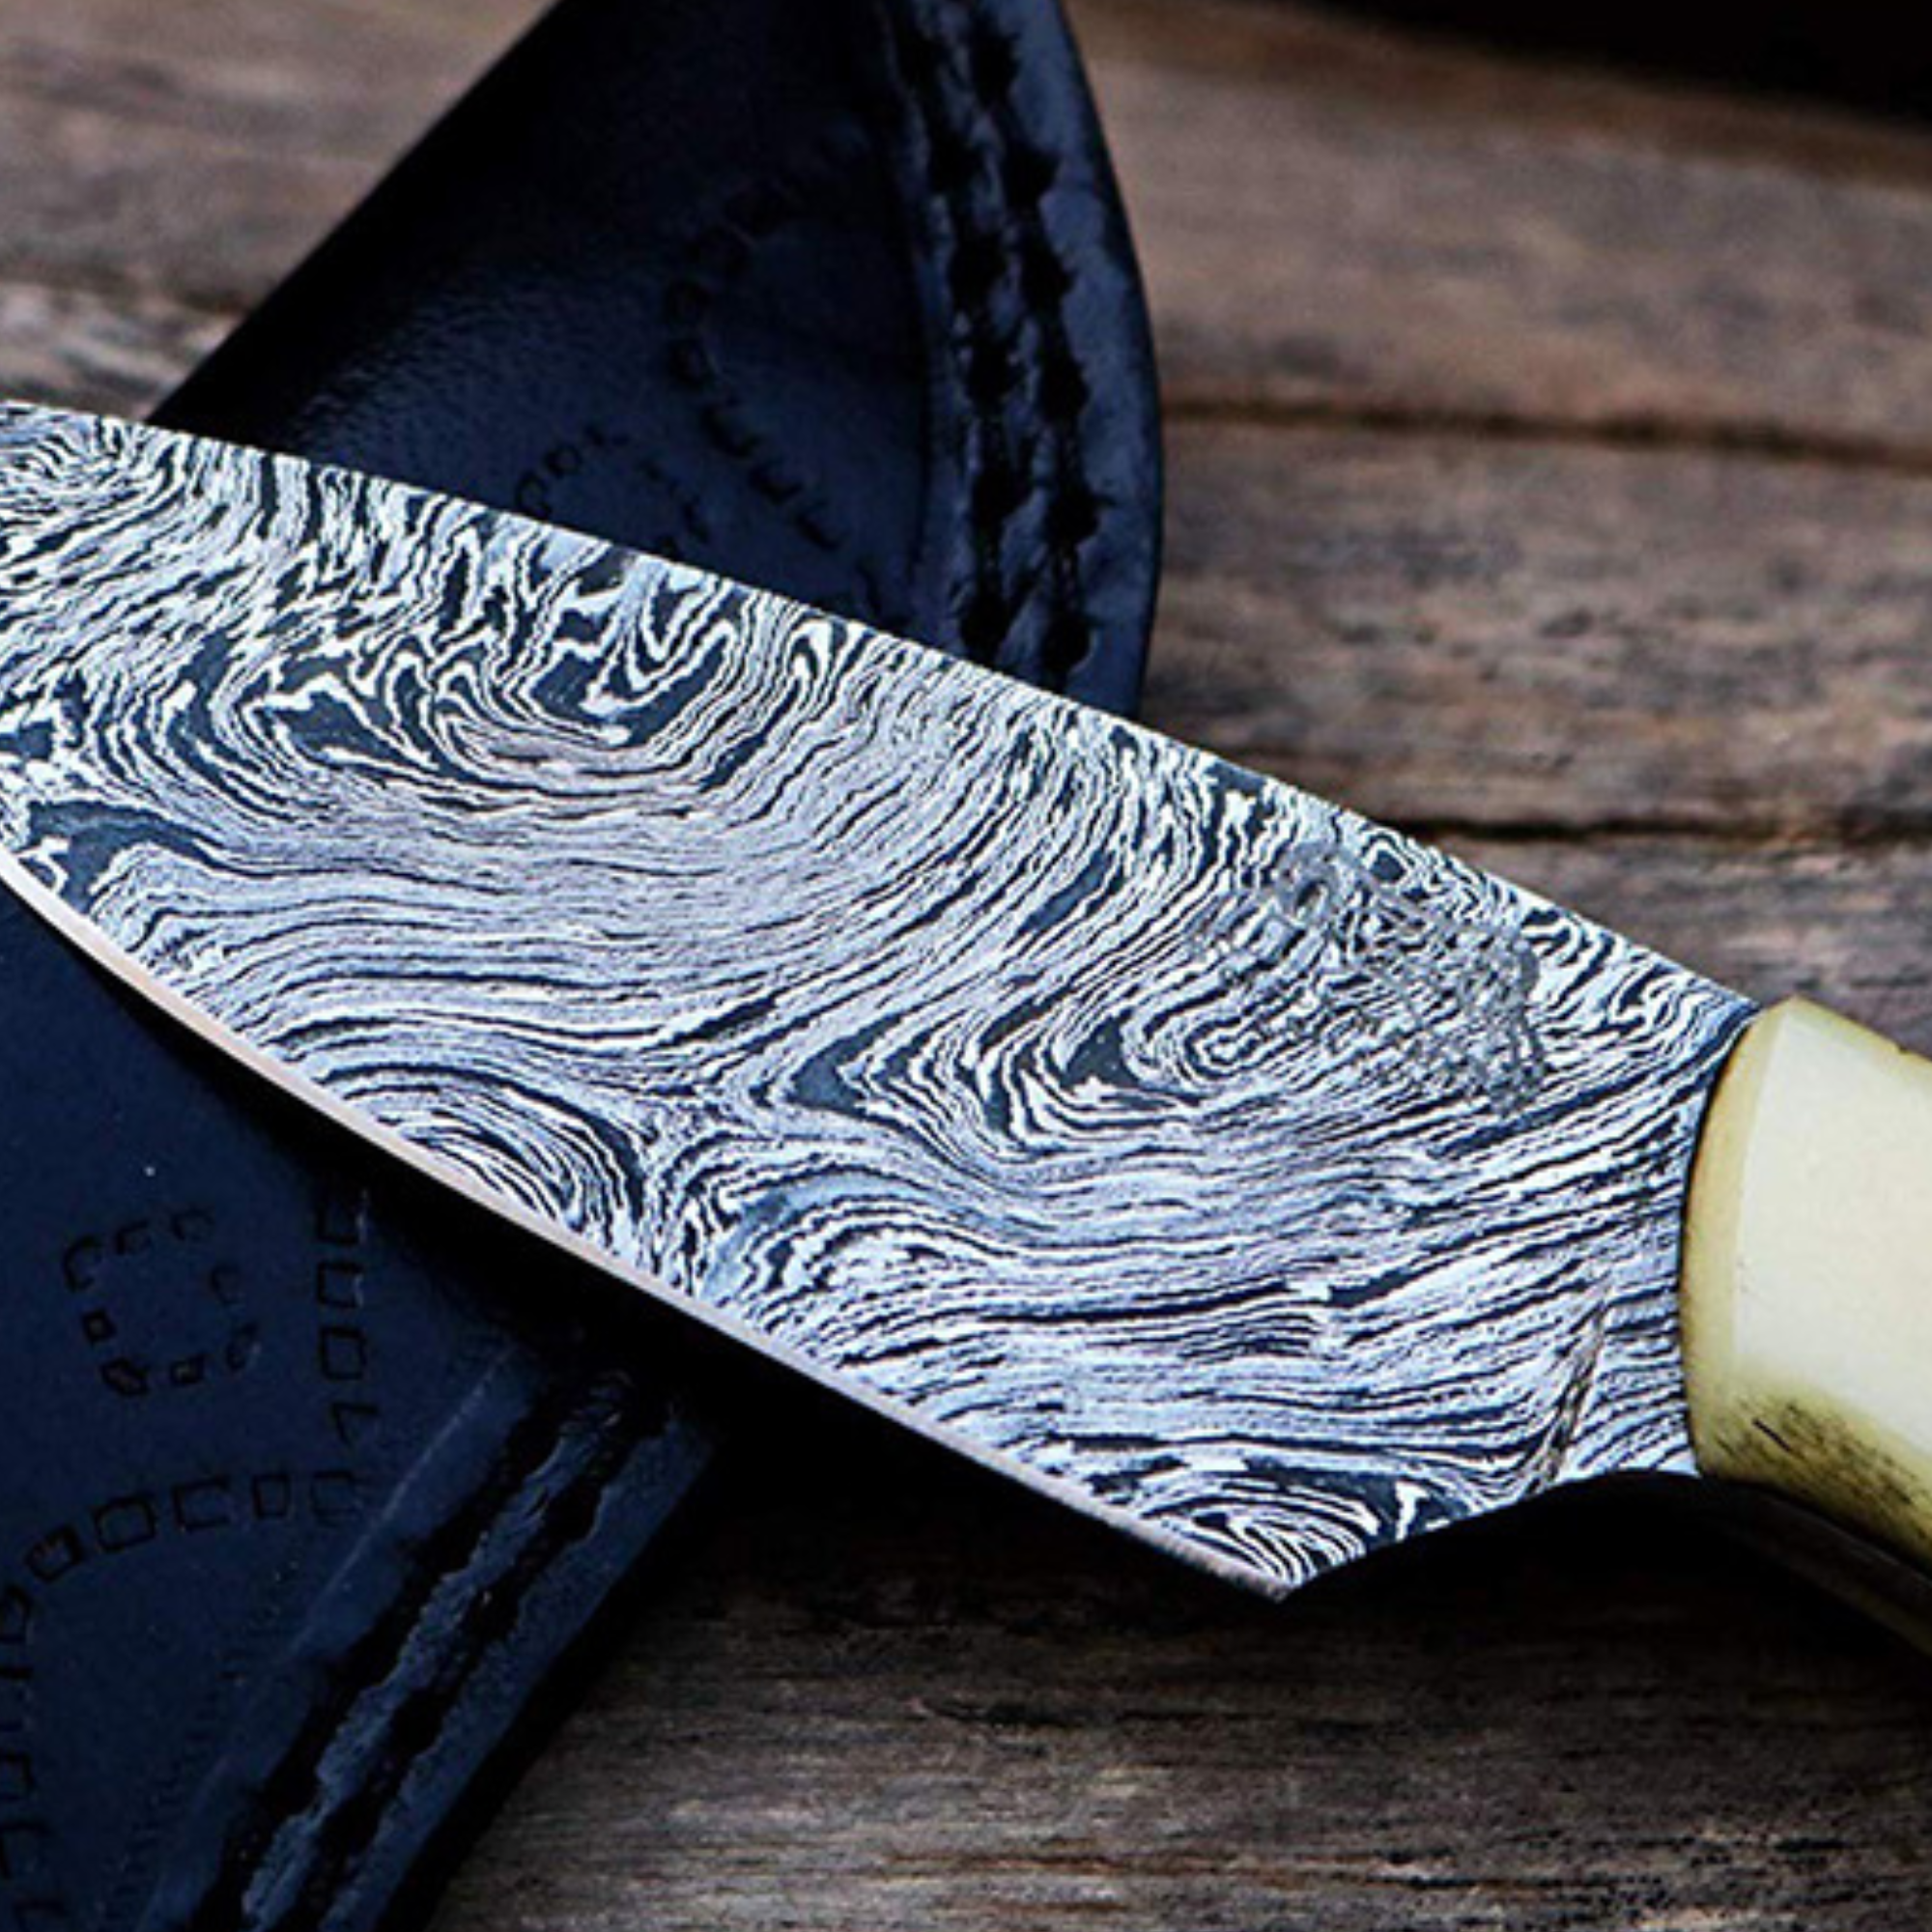 Blue Racer Lizard 6.5 Inches Long 3 Inches Blade 10 Ounce Damascus Skinner Hunting Fixed Blade Knife